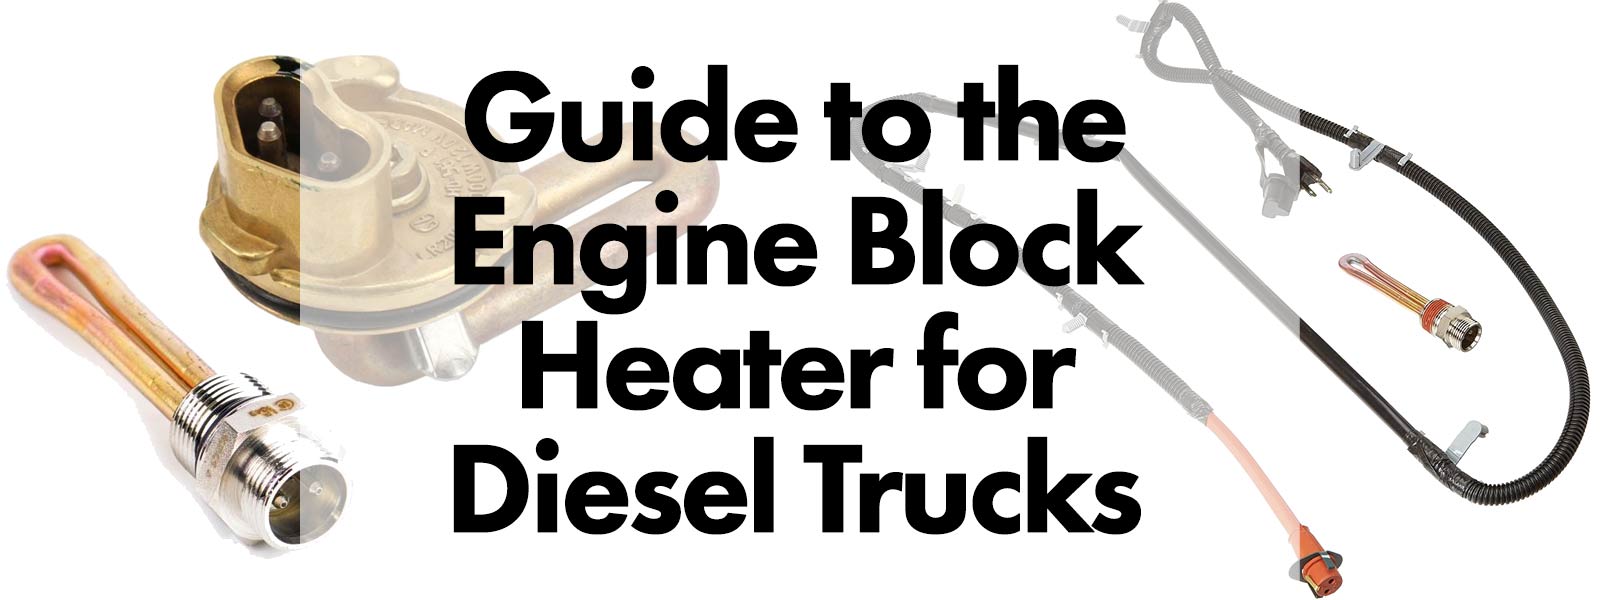 Guide to the Engine Block Heater for Diesel Trucks